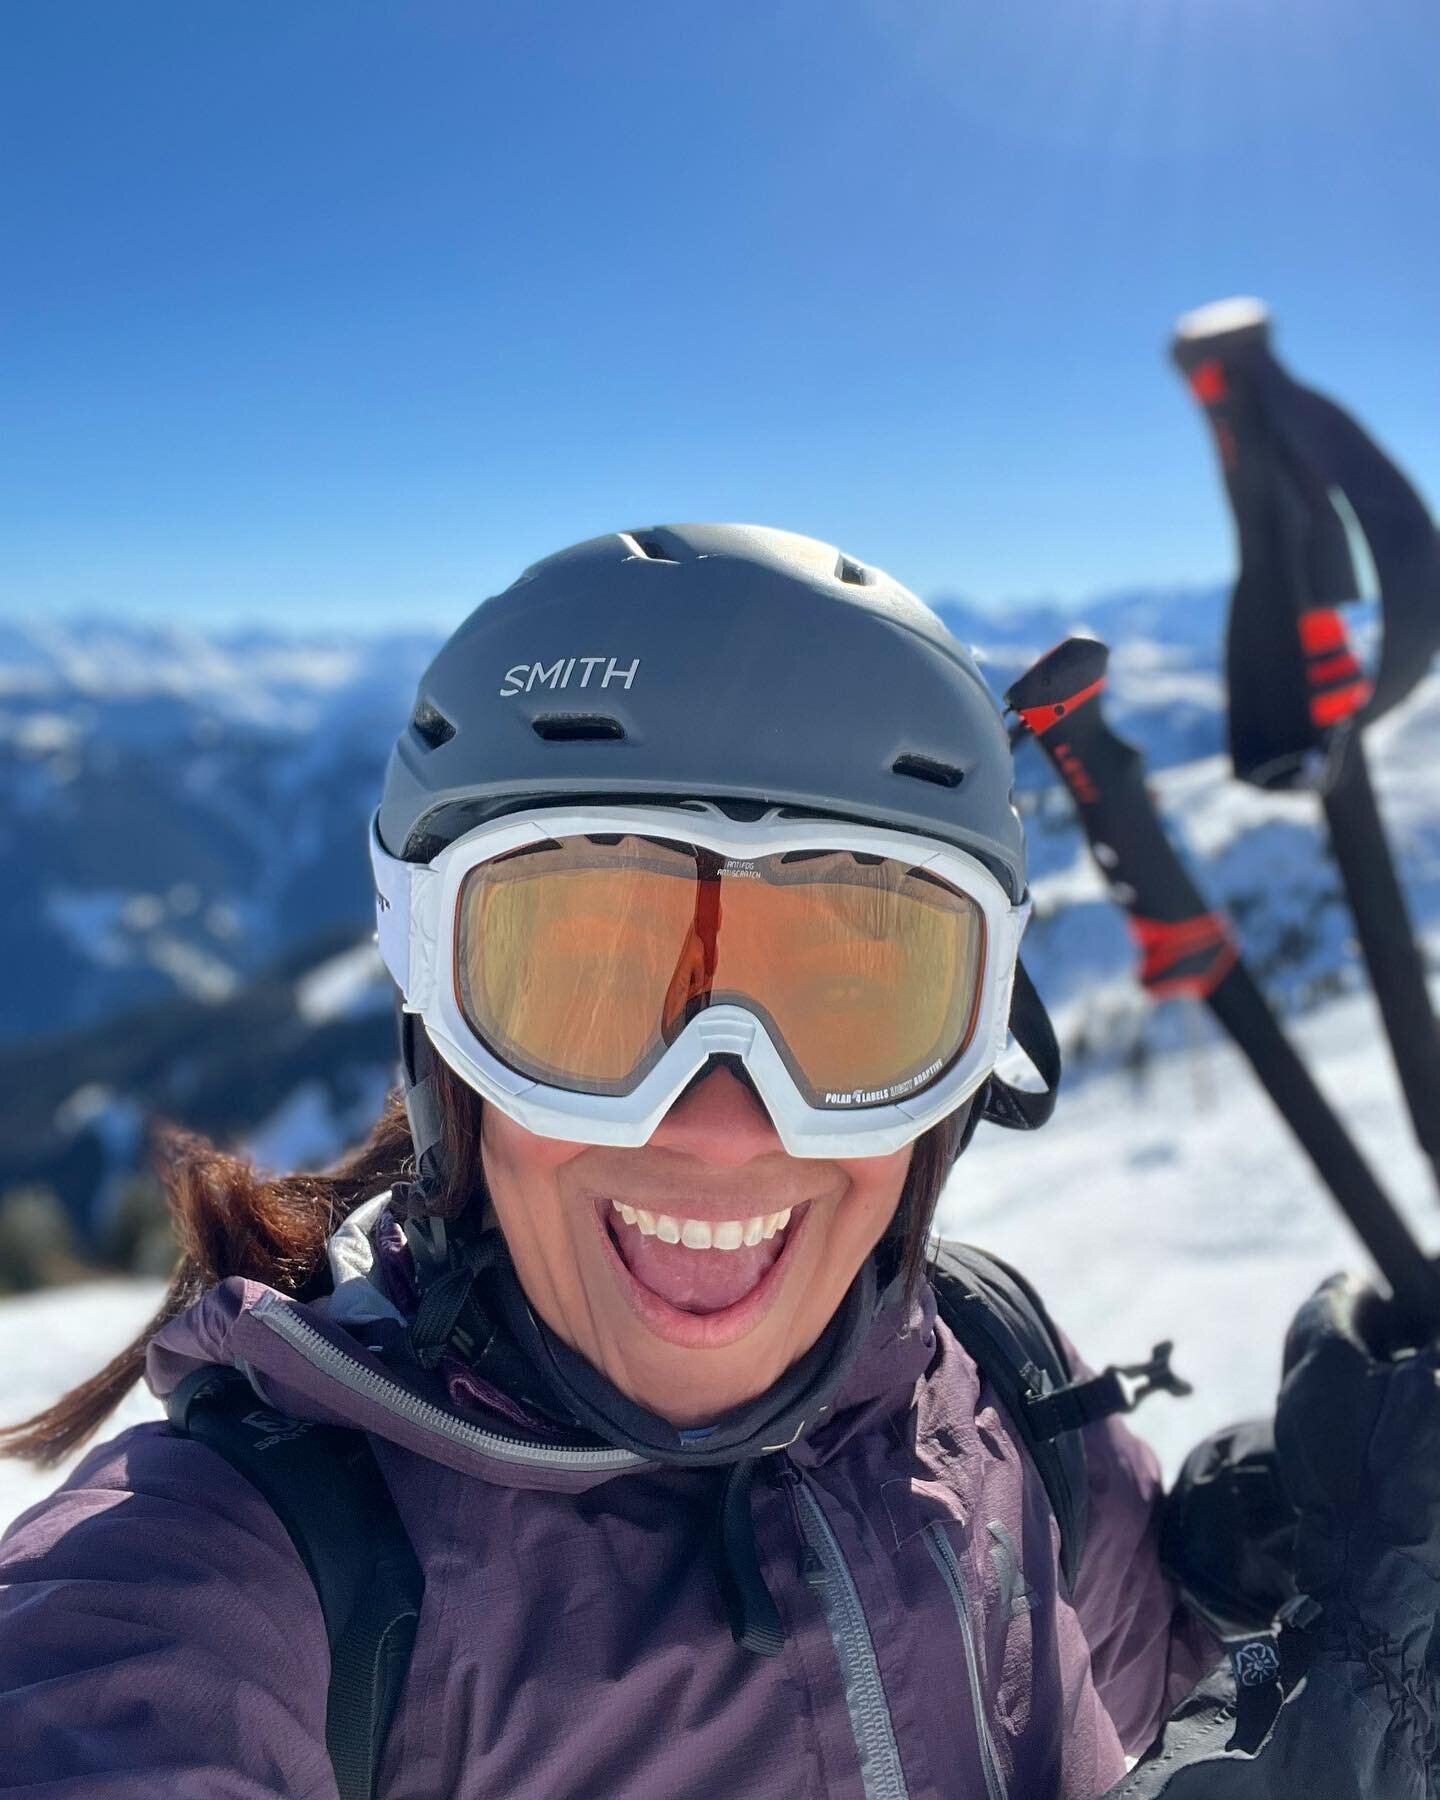 Mmmmm. Only joy 🤩 Still soaking up all the beautiful mountain energy from earlier this month! The smile just grows bigger out here&mdash;skied my little heart out. Nature is the ultimate gift.

Thank you @kitzbuehel_tirol for the lovely welcome 🙏🏽